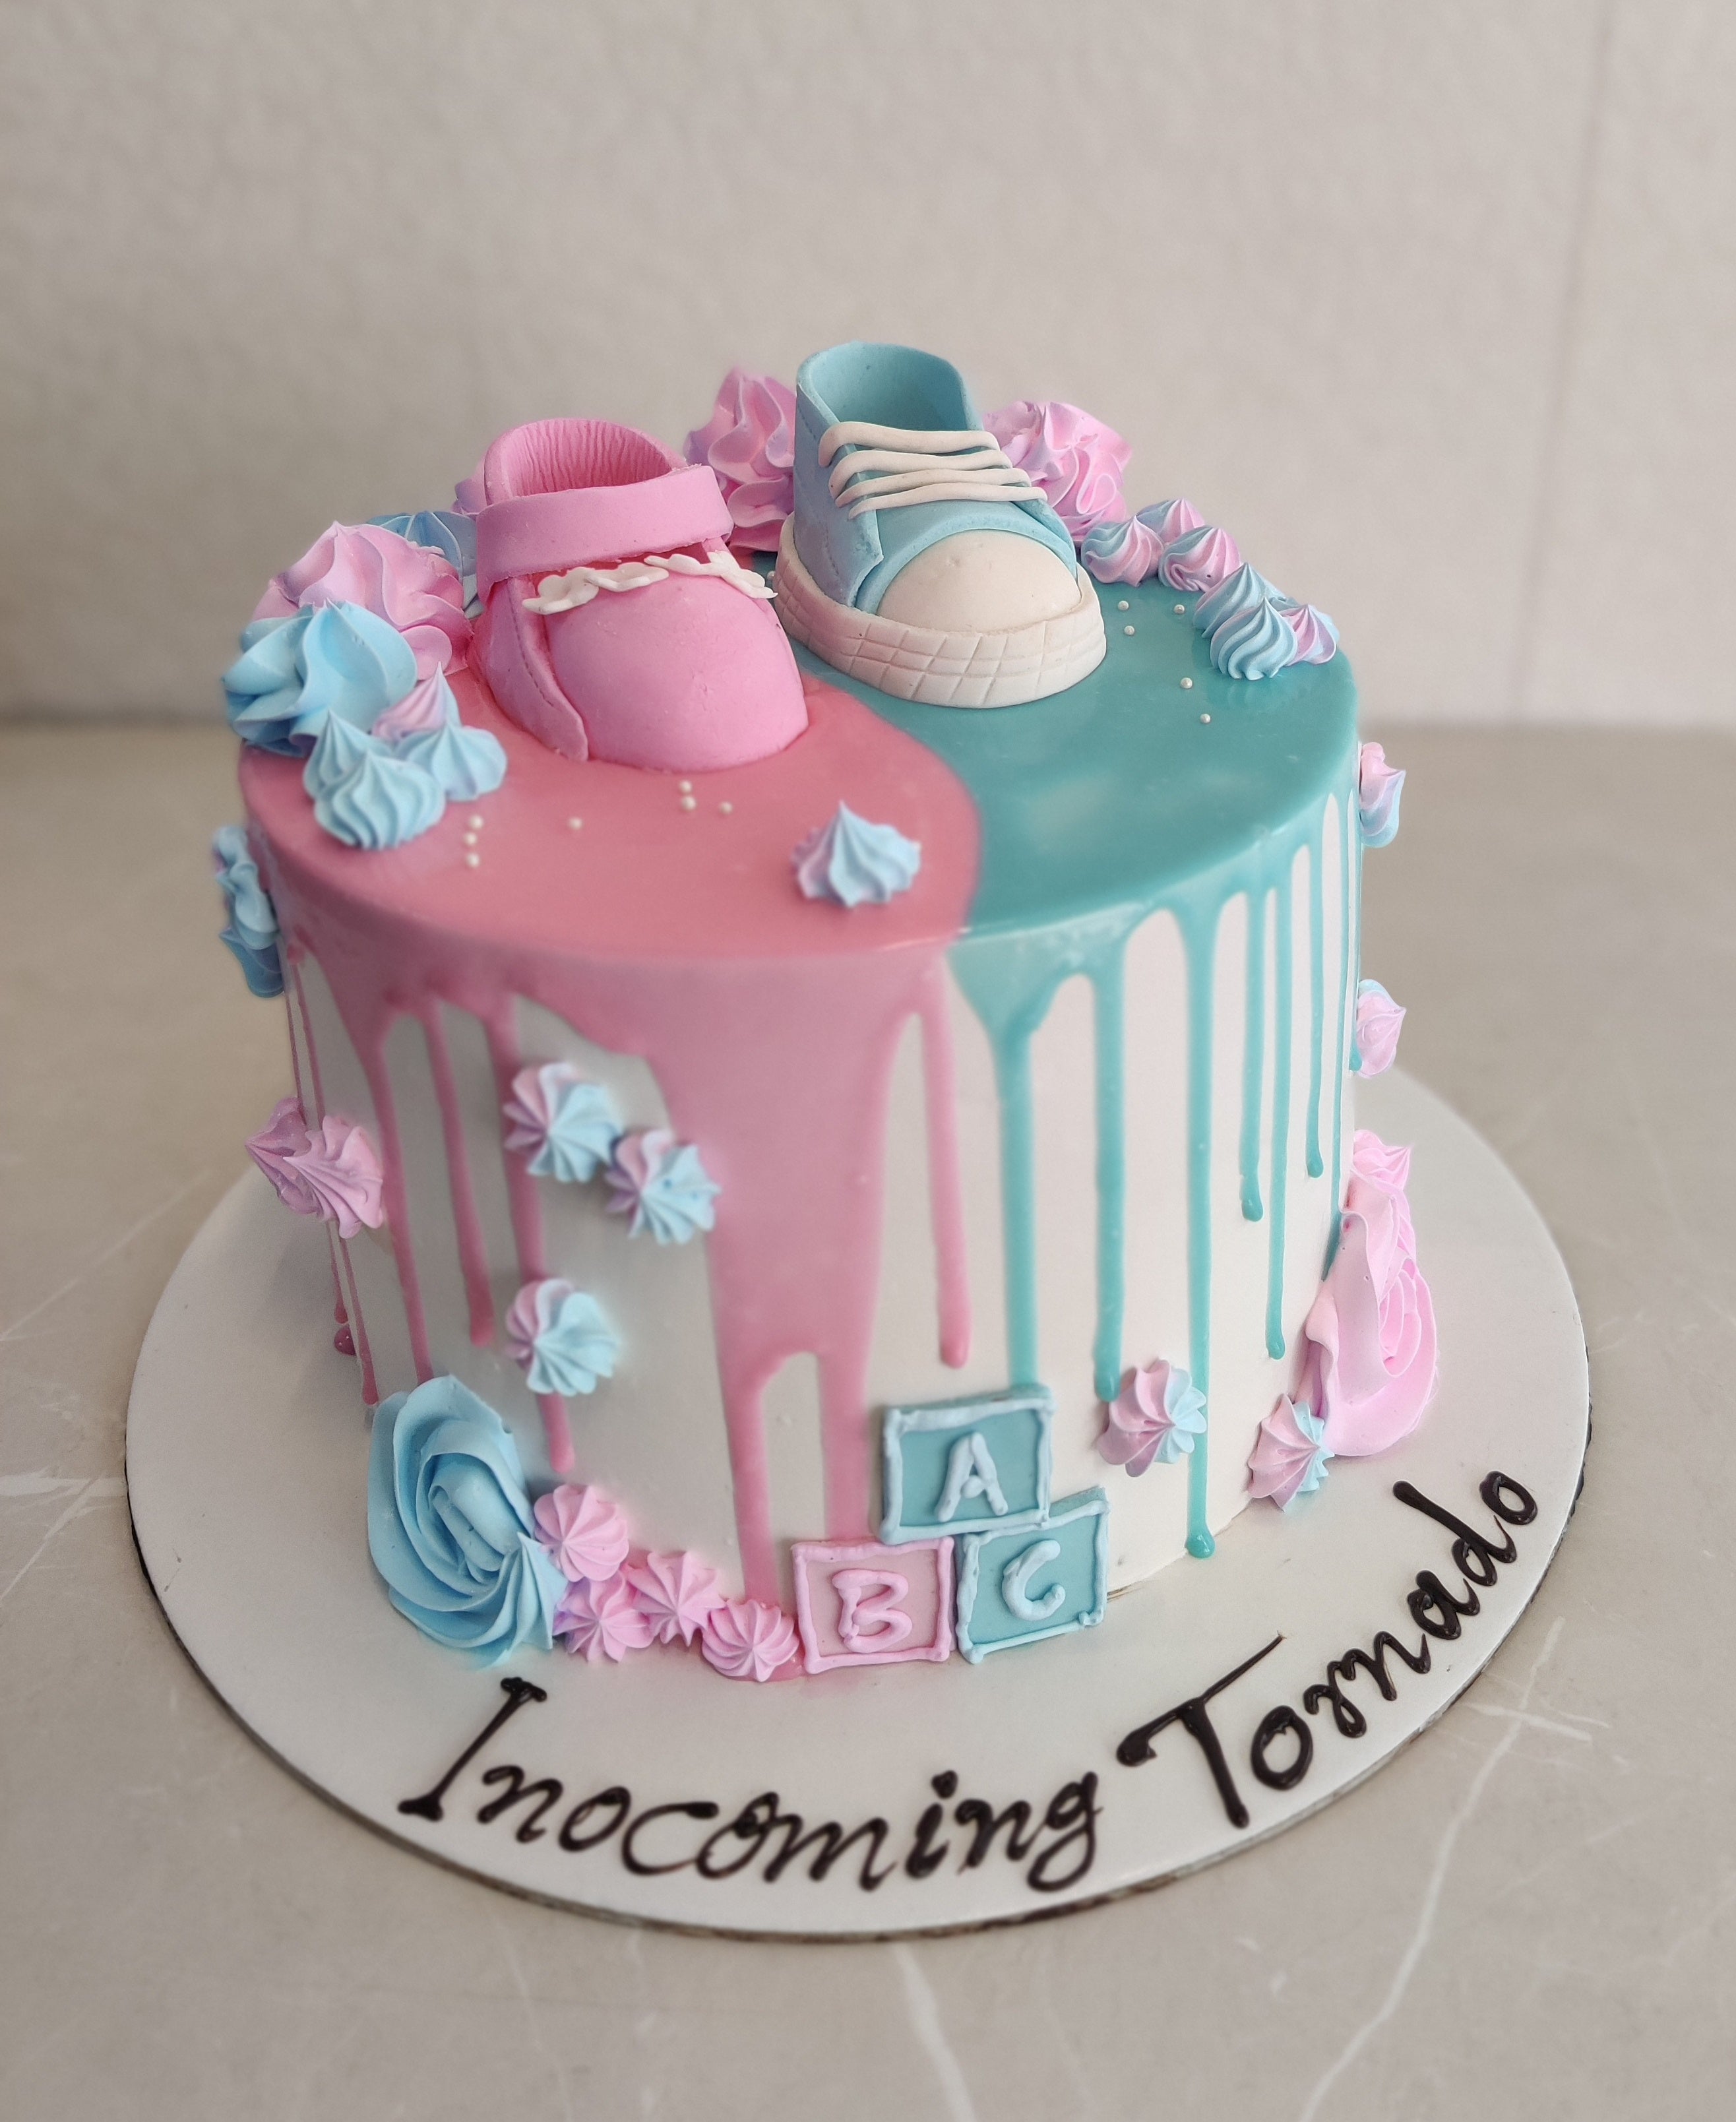 15 Baby Shower Cakes - Ideas & Recipes for Baby Shower Cakes—Delish.com